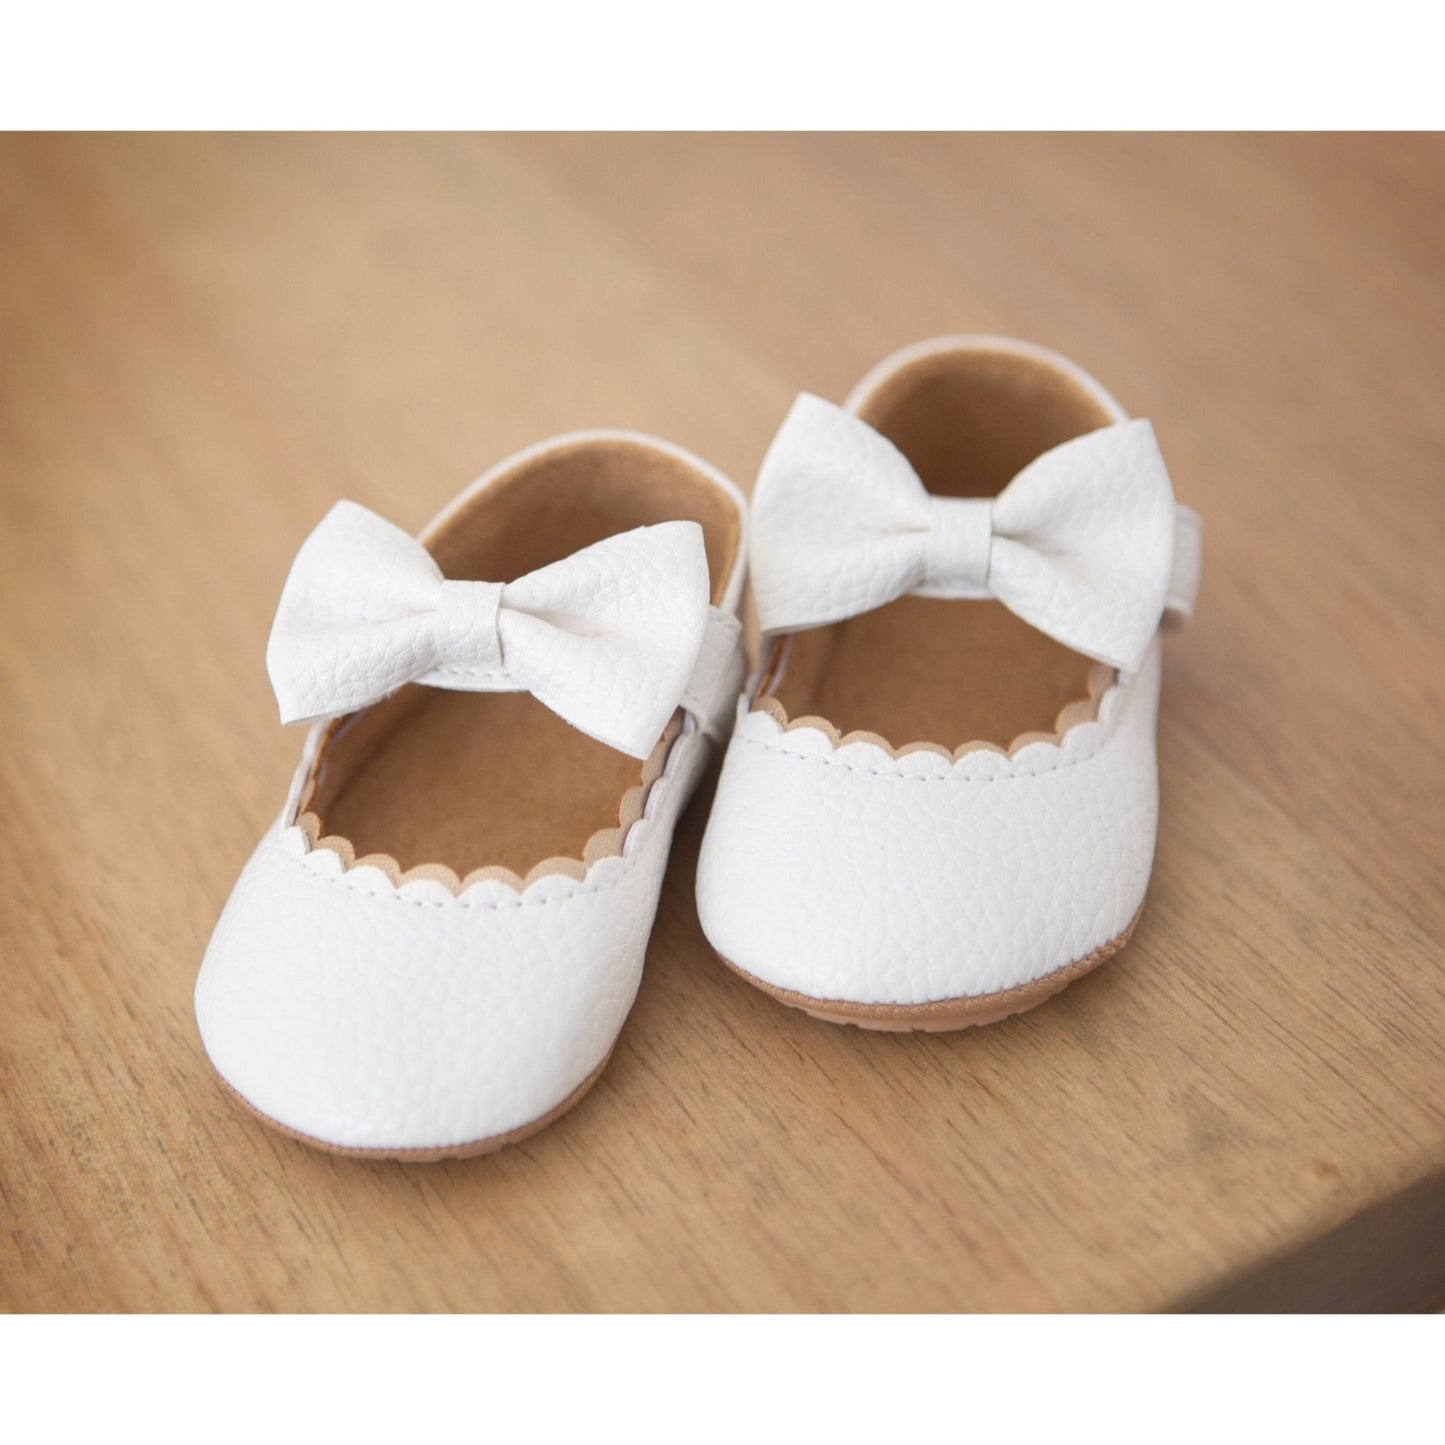 Mary Janes Baby Shoes - Cheerful Lane